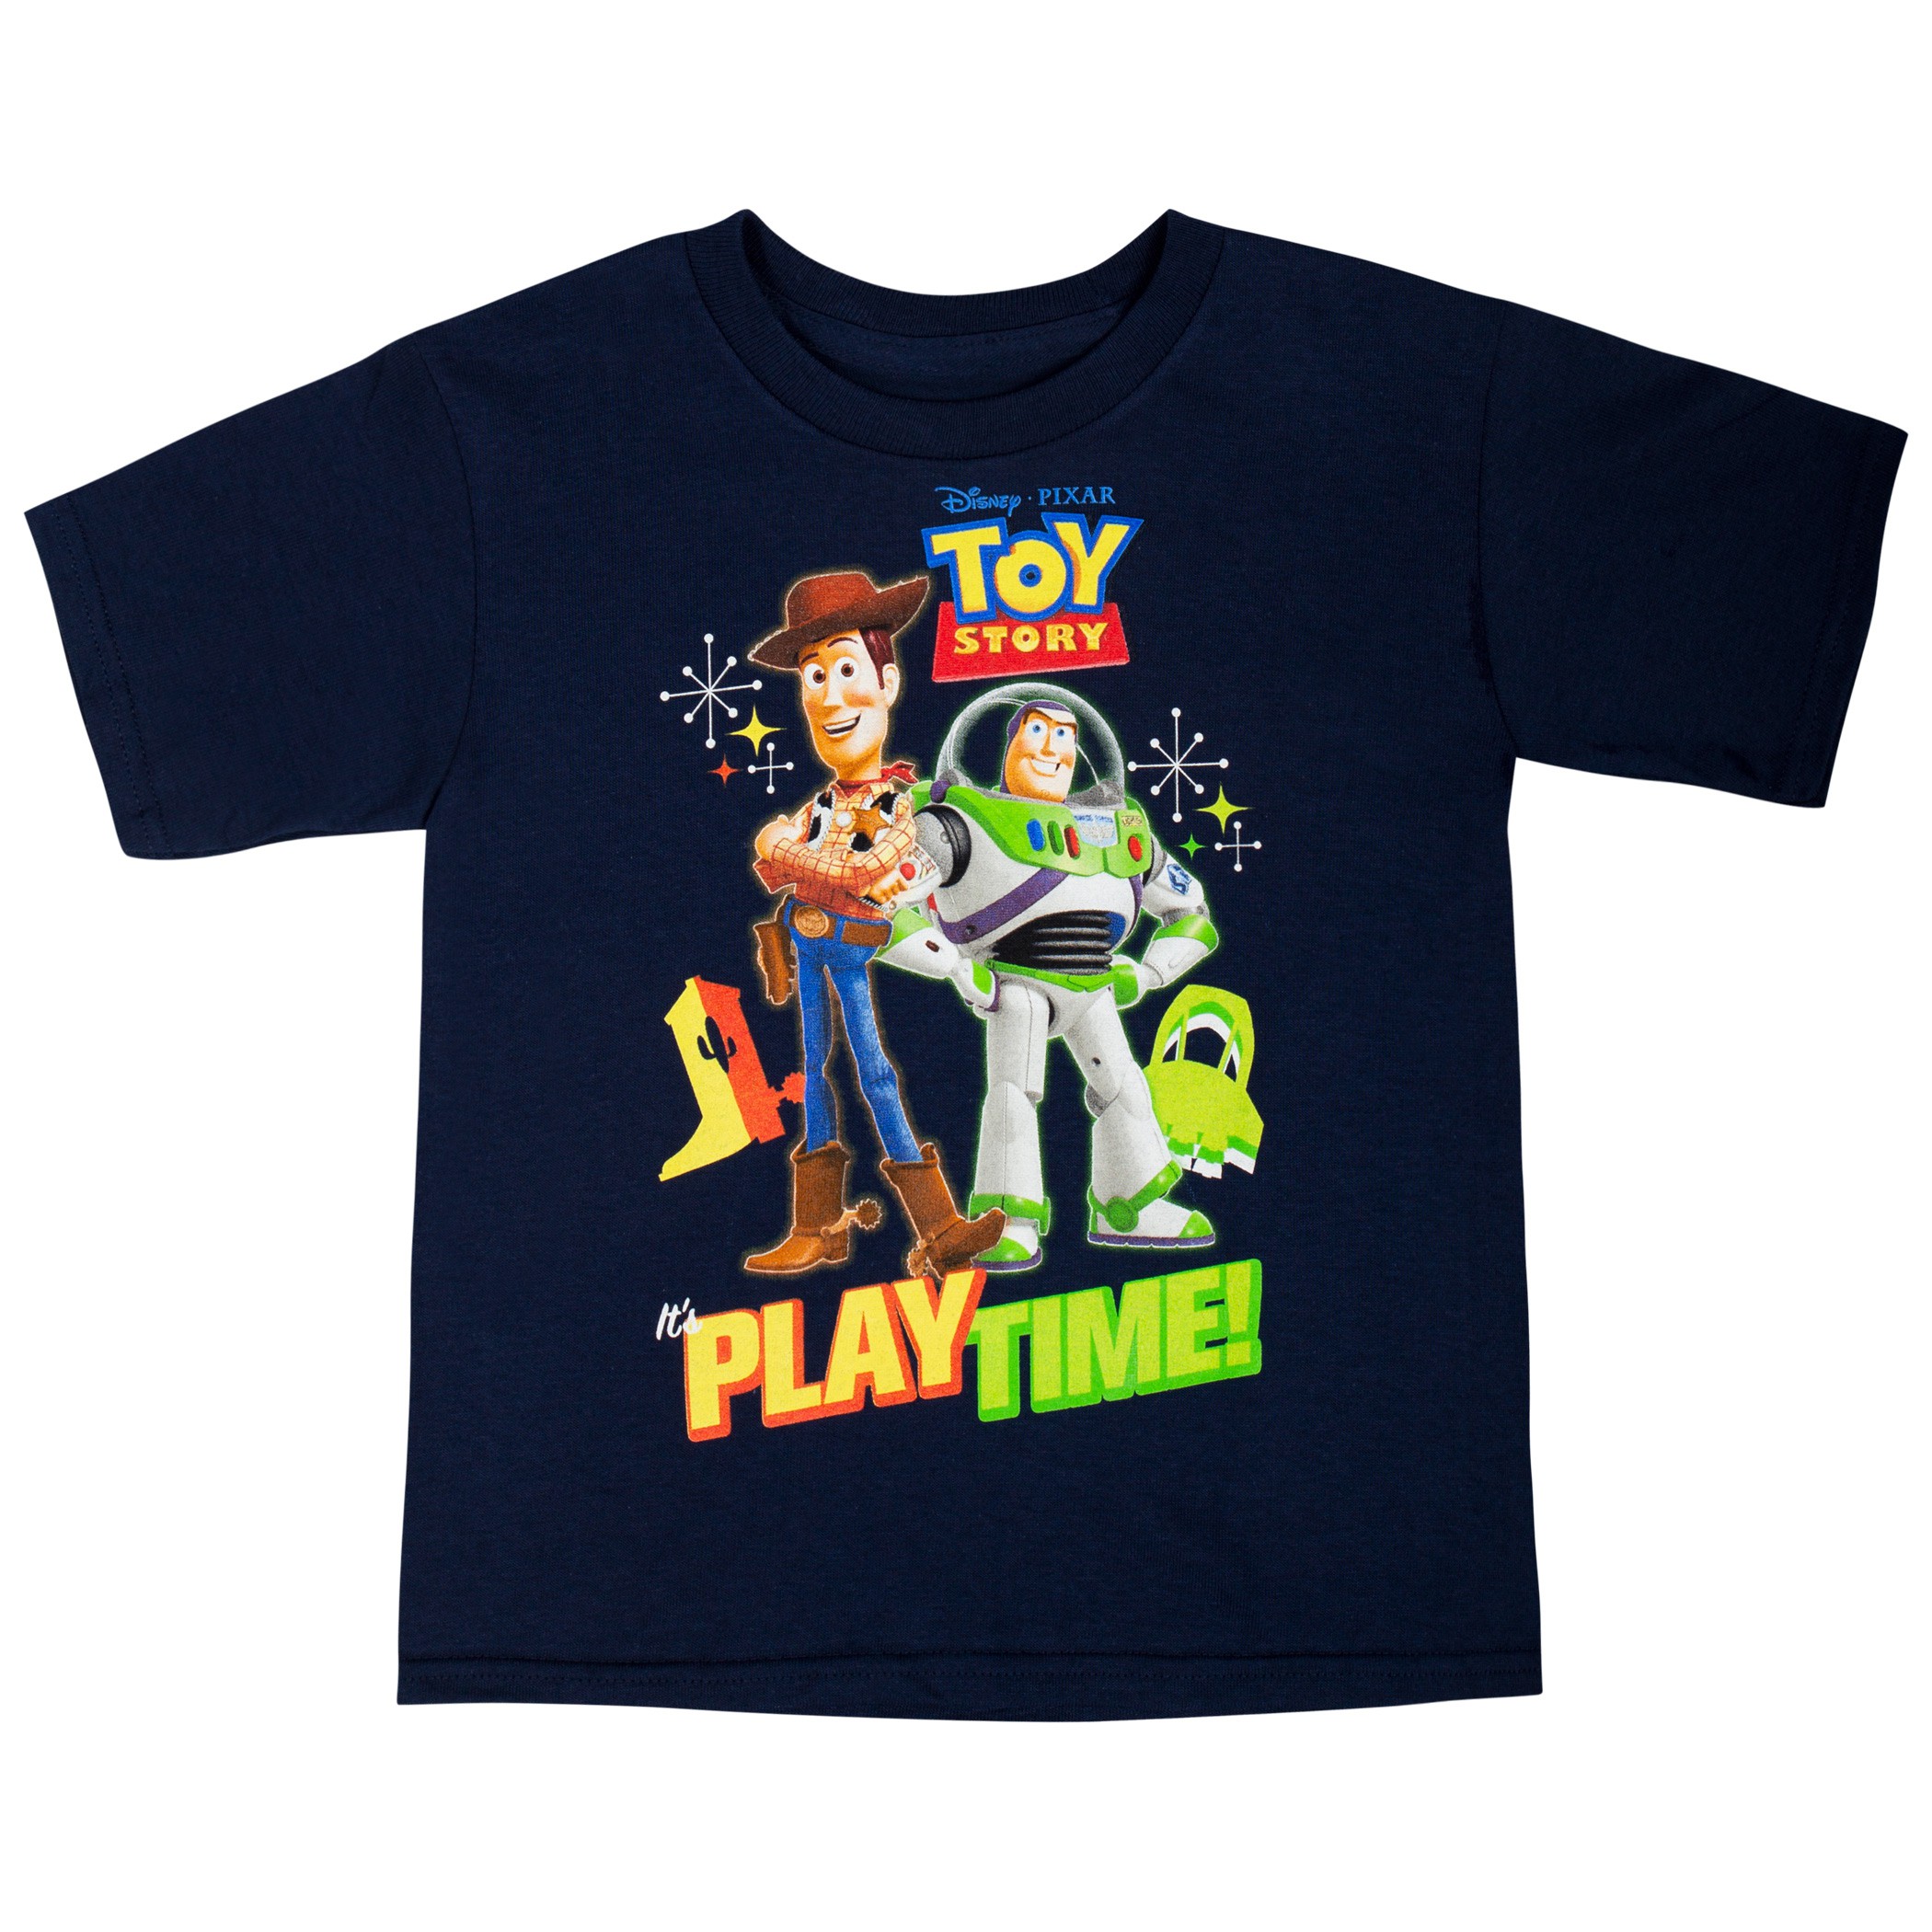 Toy Story Toddlers Play Time Navy Blue Tee Shirt